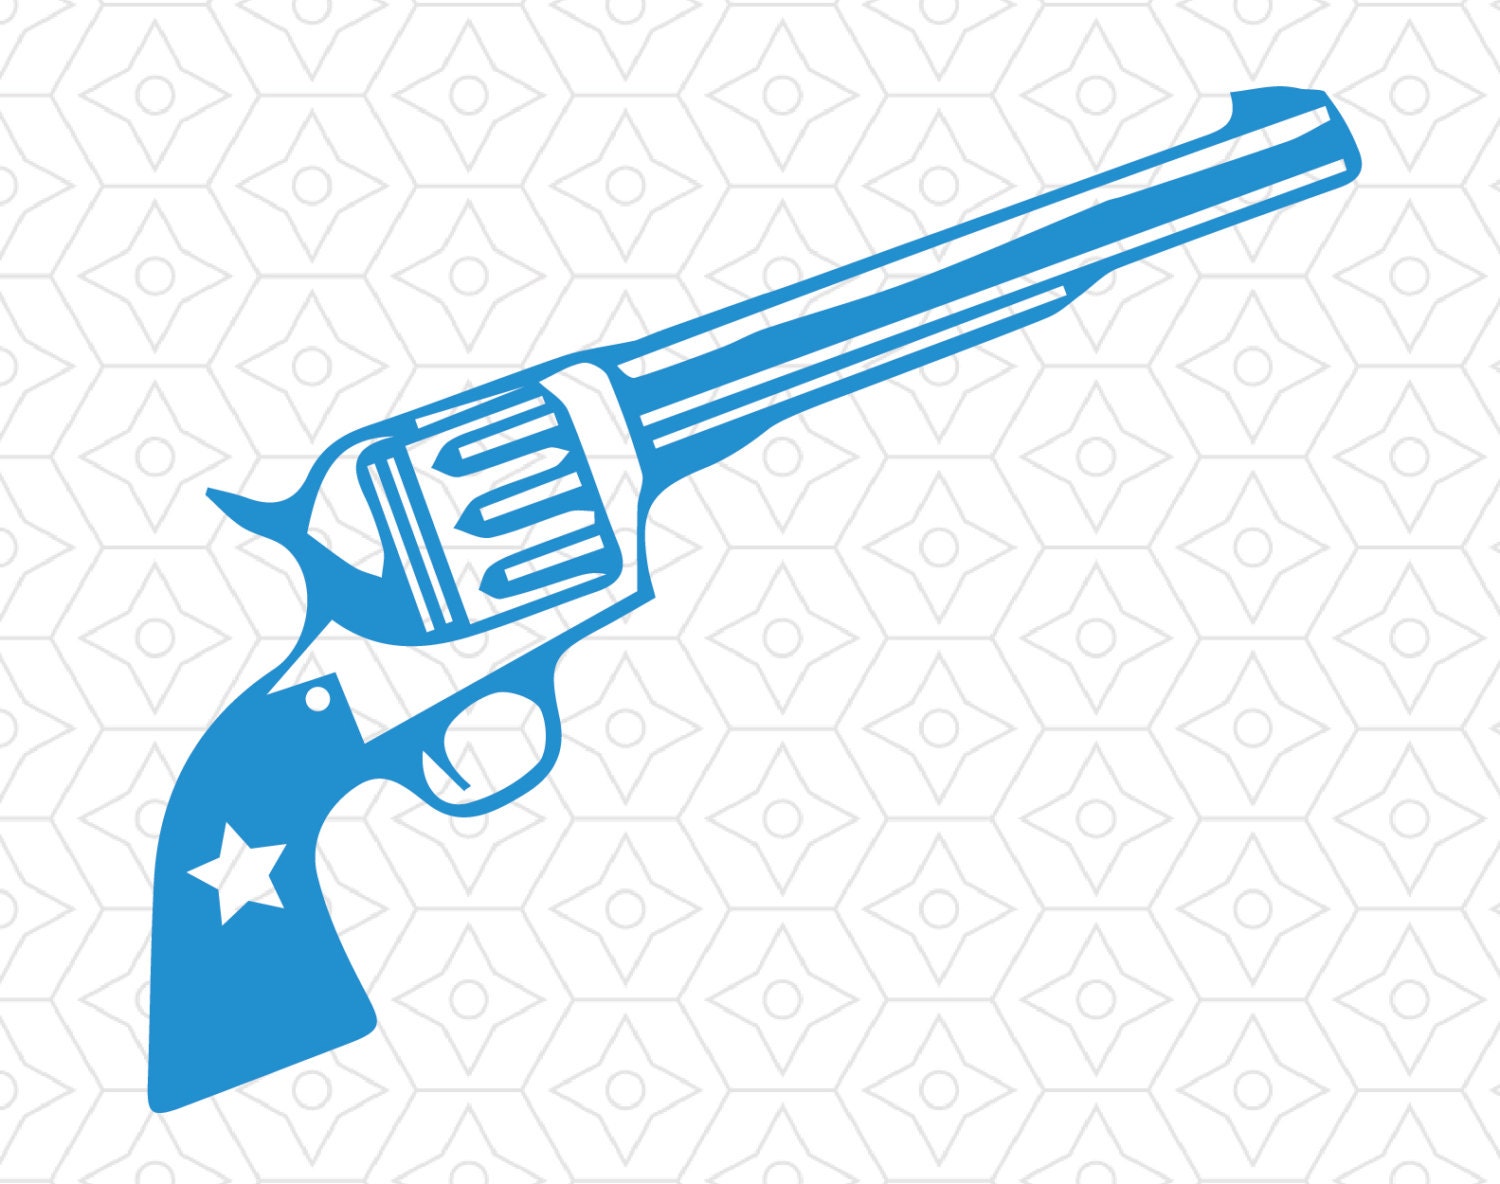 Download Western Six Shooter Gun Decal SVG DXF and AI Vector files